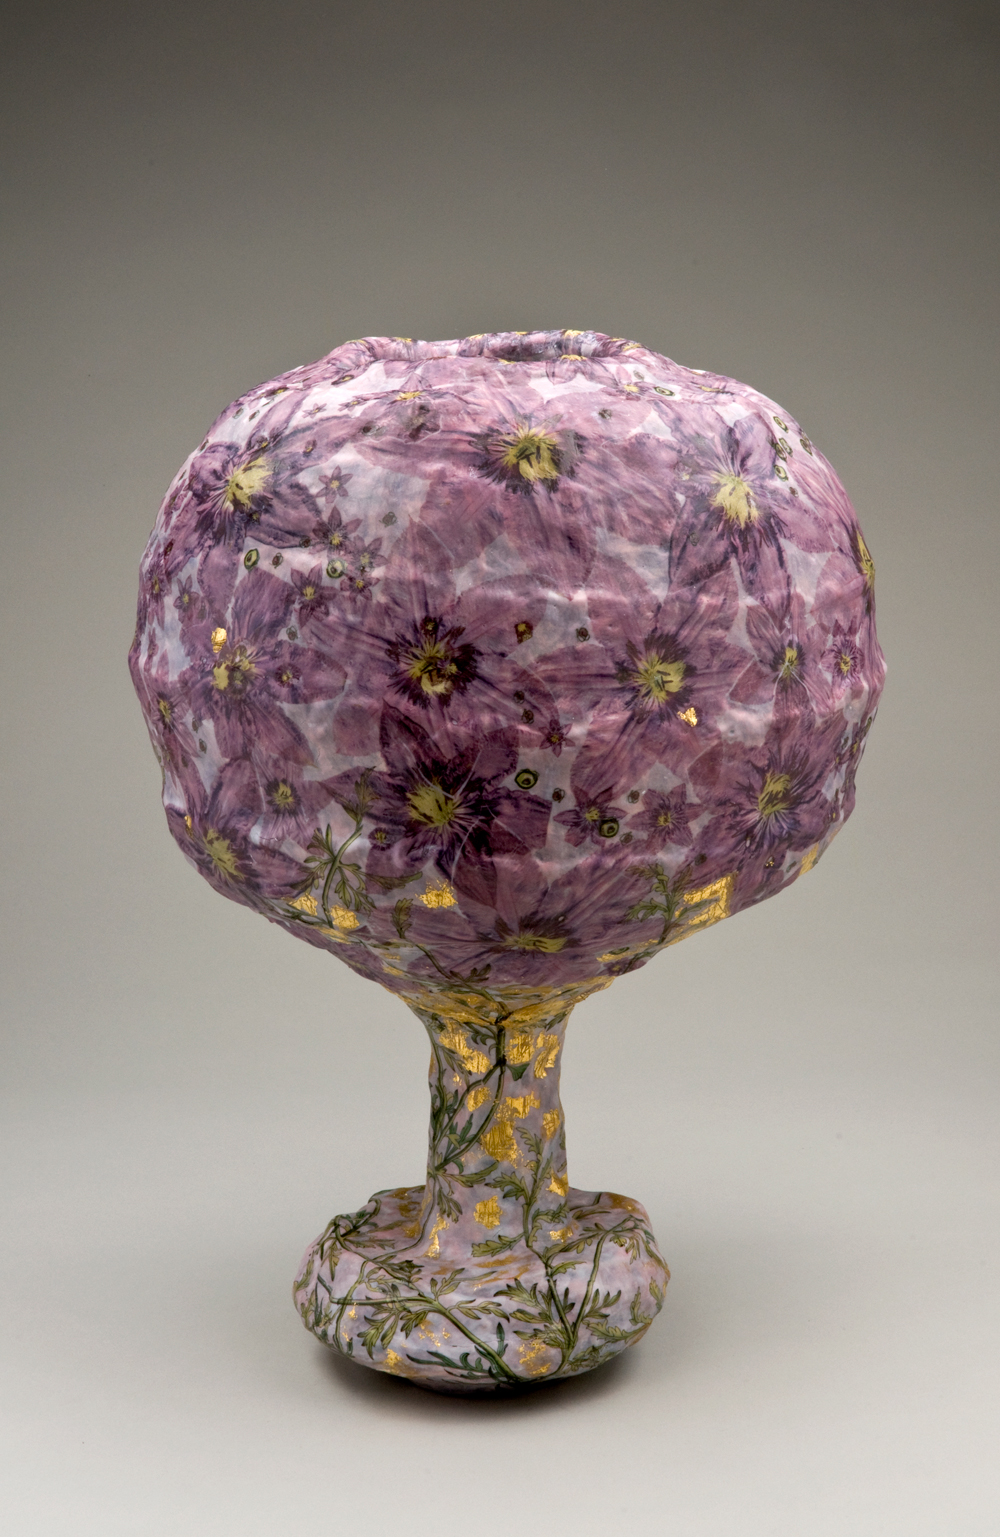 Large Vase Sculpture with Purple Clematis